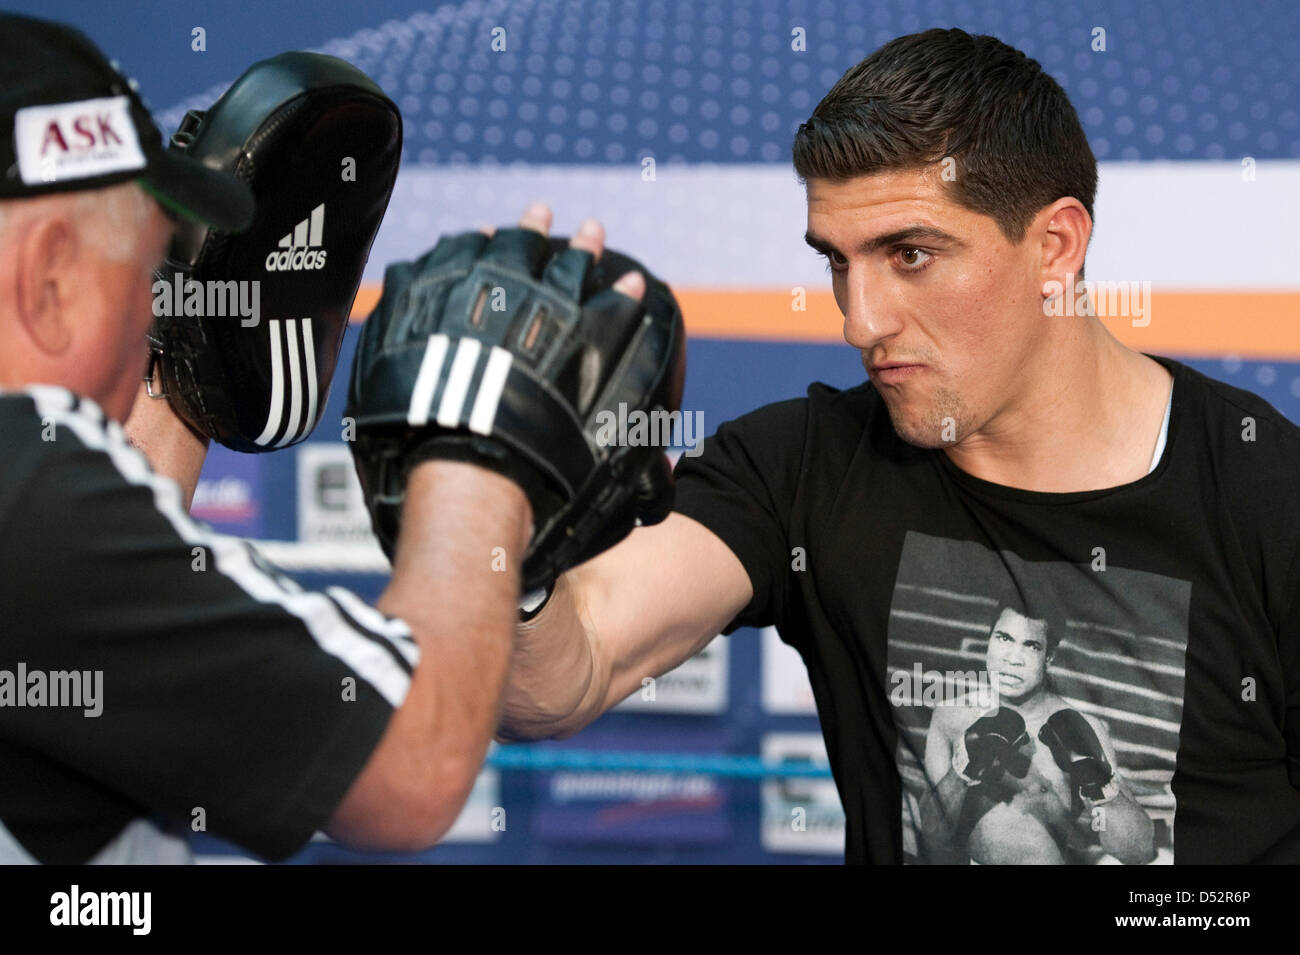 German WBO cruiserweight champion Marco Huck (R) and his coach Ulli Wegener (L) during a public training in Berlin, Germany, 09 March 2010. Huck aims to defend his WBO title against US contender Adam Richards on 13 March. Photo: ROBERT SCHLESINGER Stock Photo